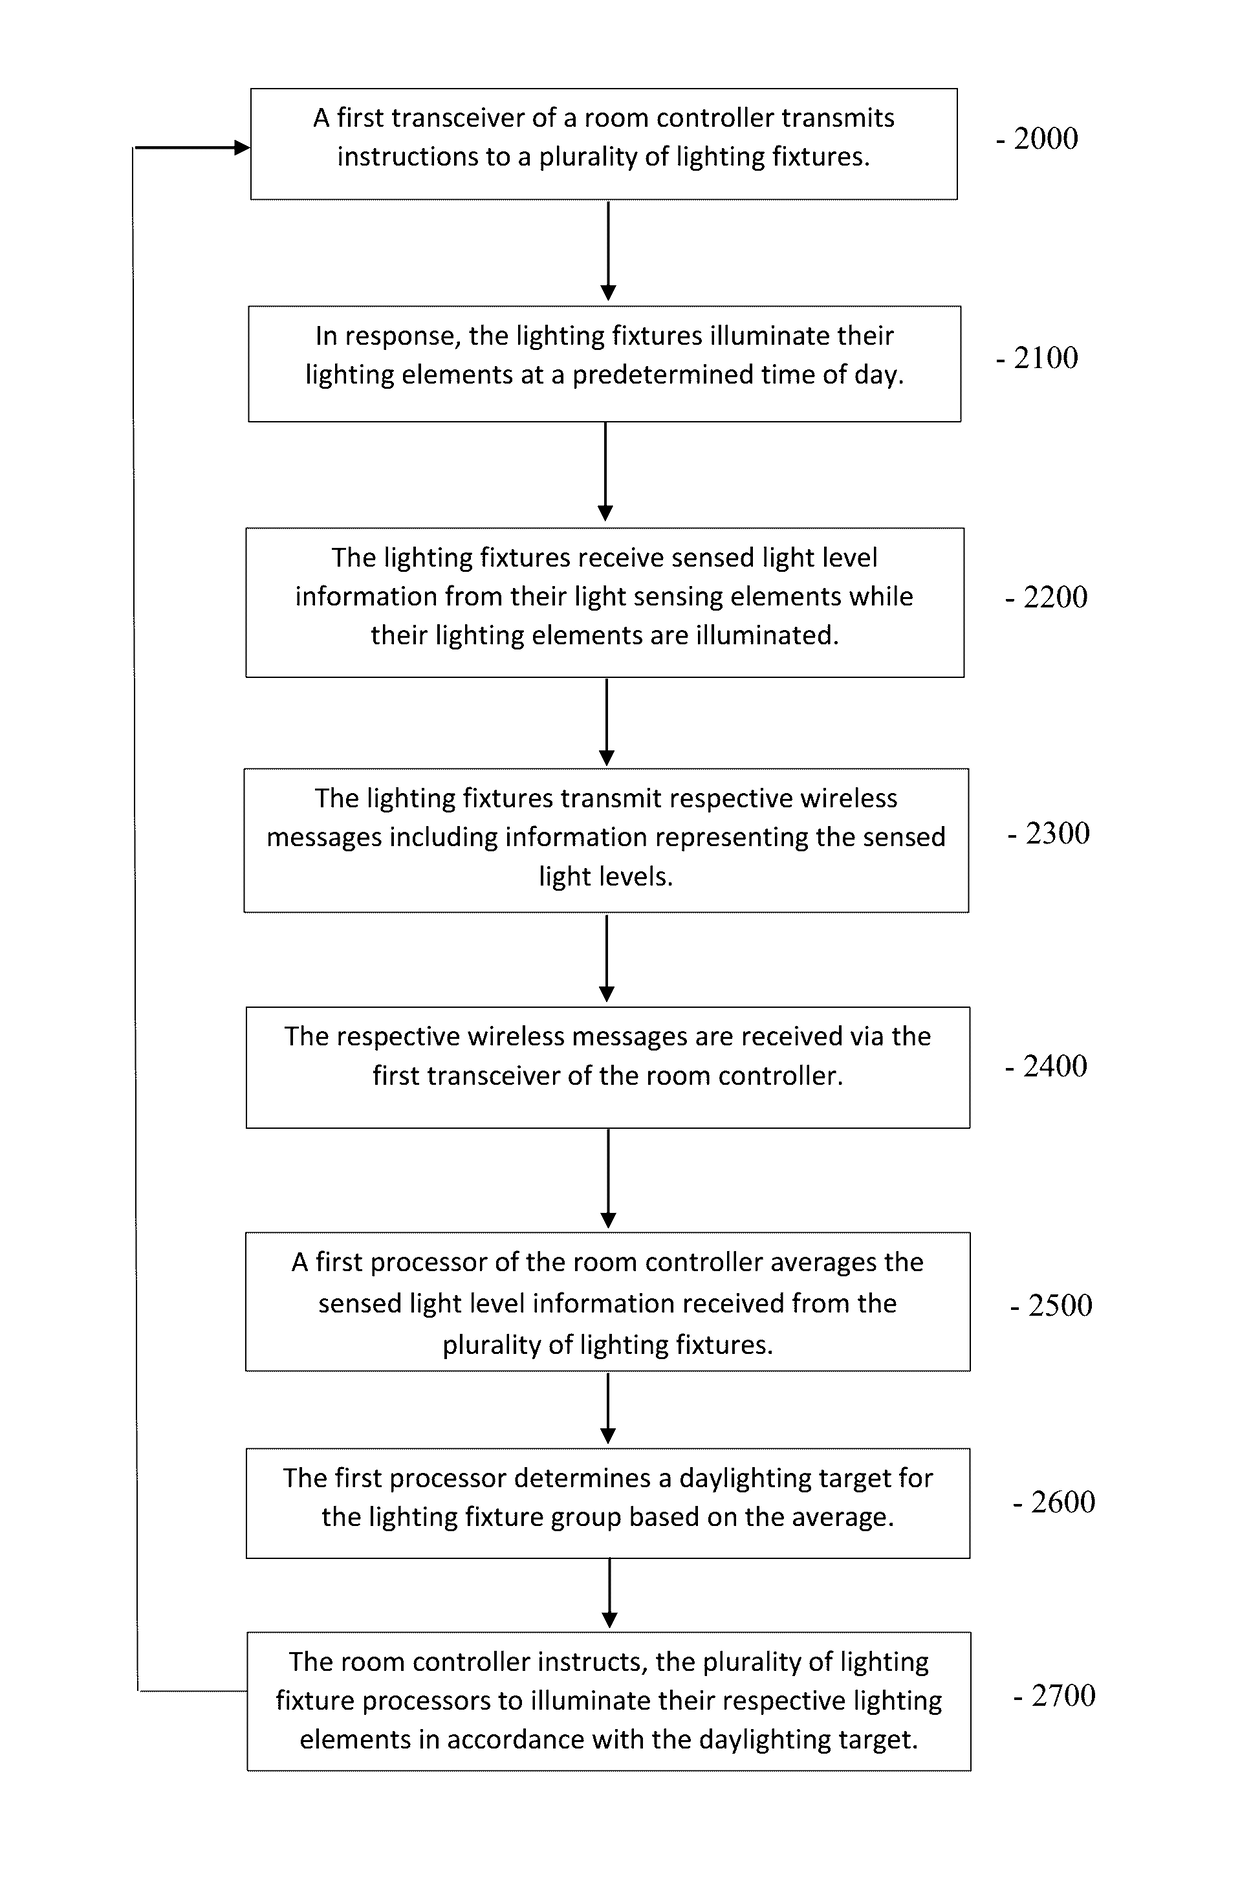 Brightness monitoring for LED failures and daylighting target adjusting